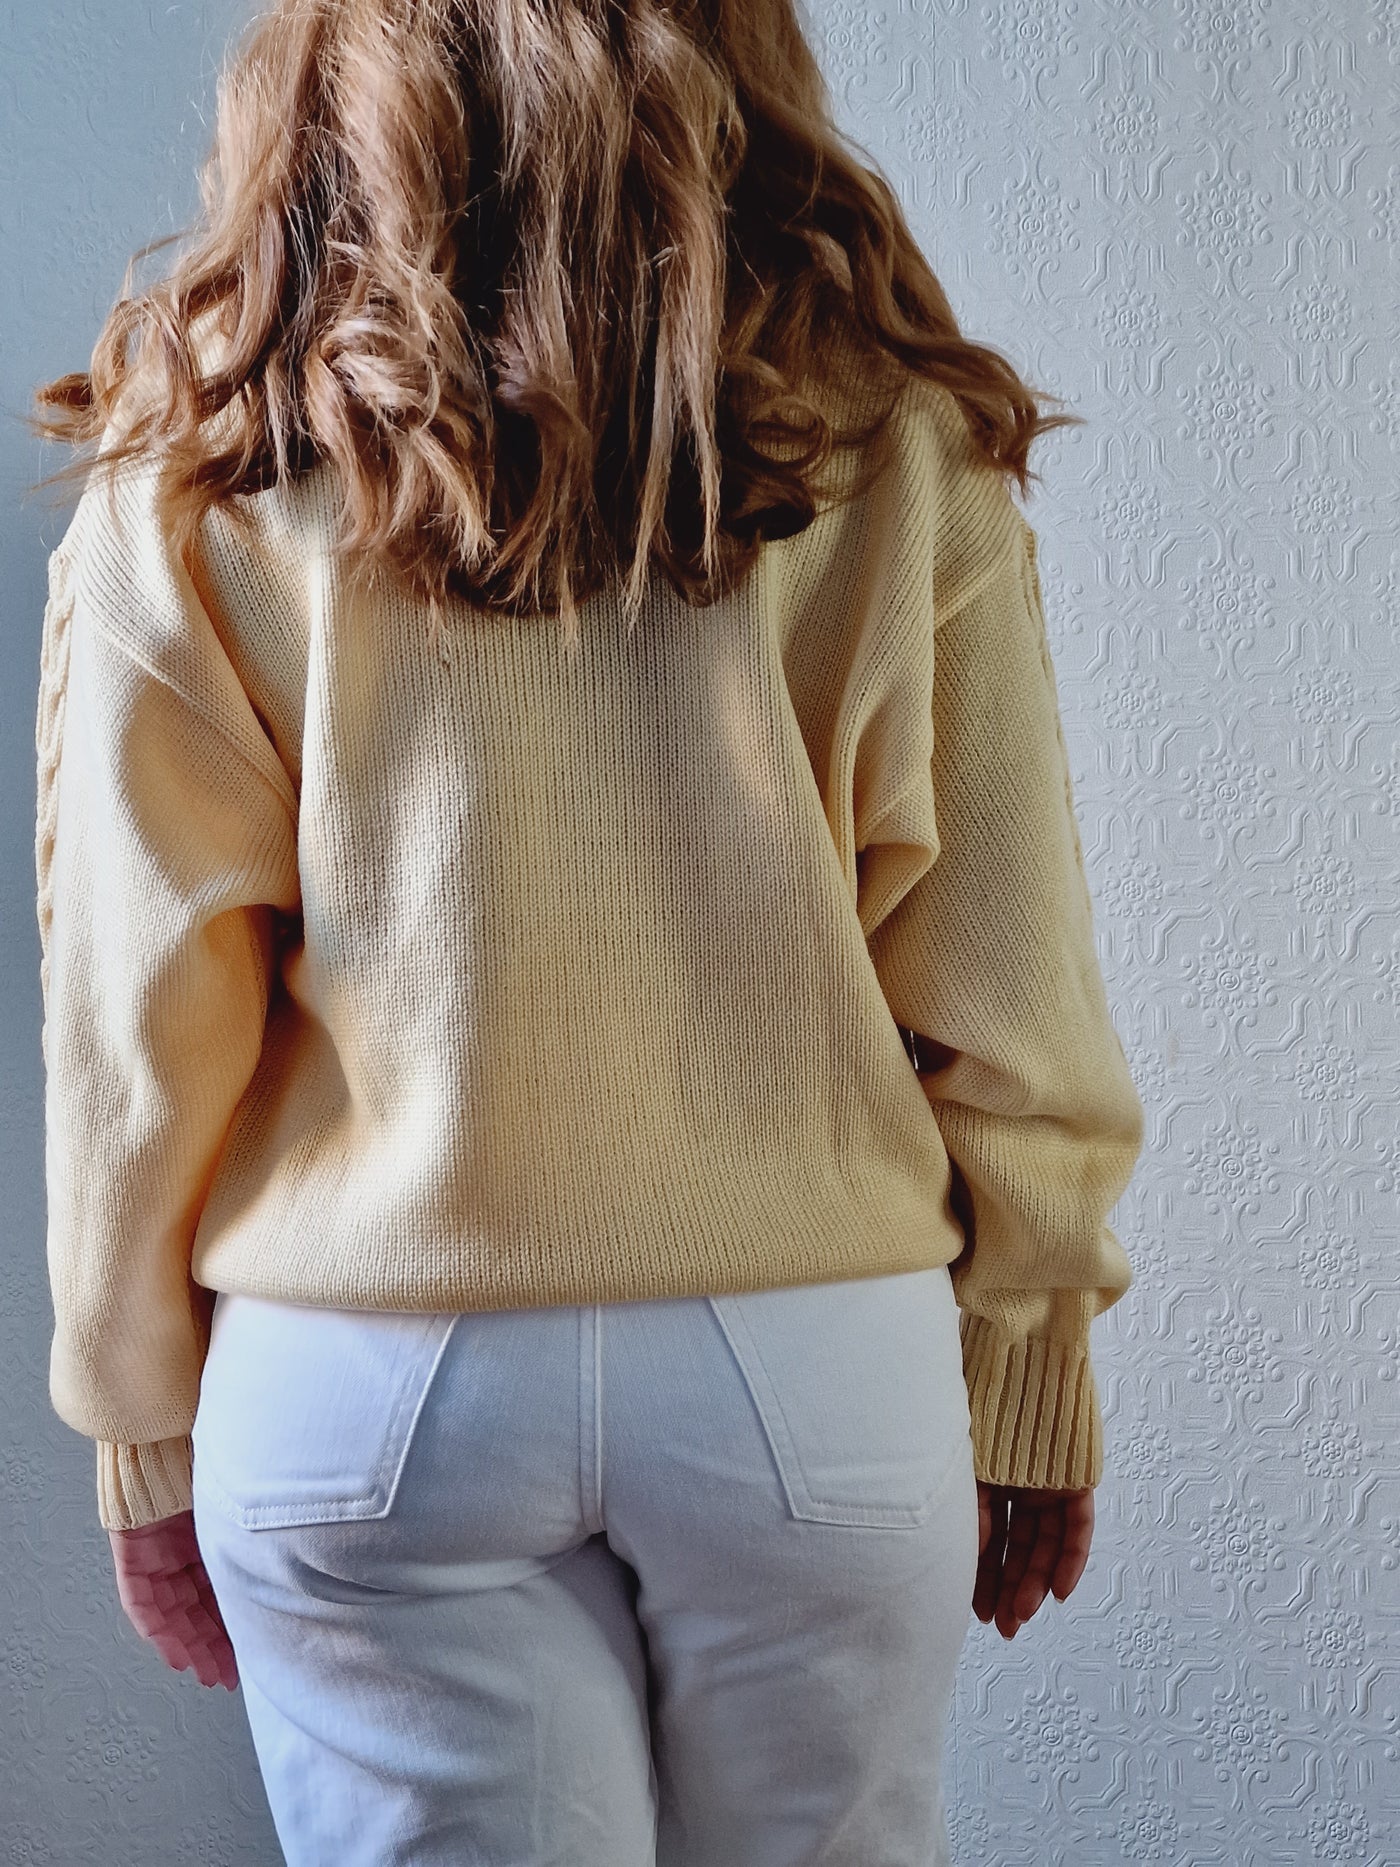 Vintage 90s Pale Yellow Cable Knit Jumper with Crew Neck - M/L